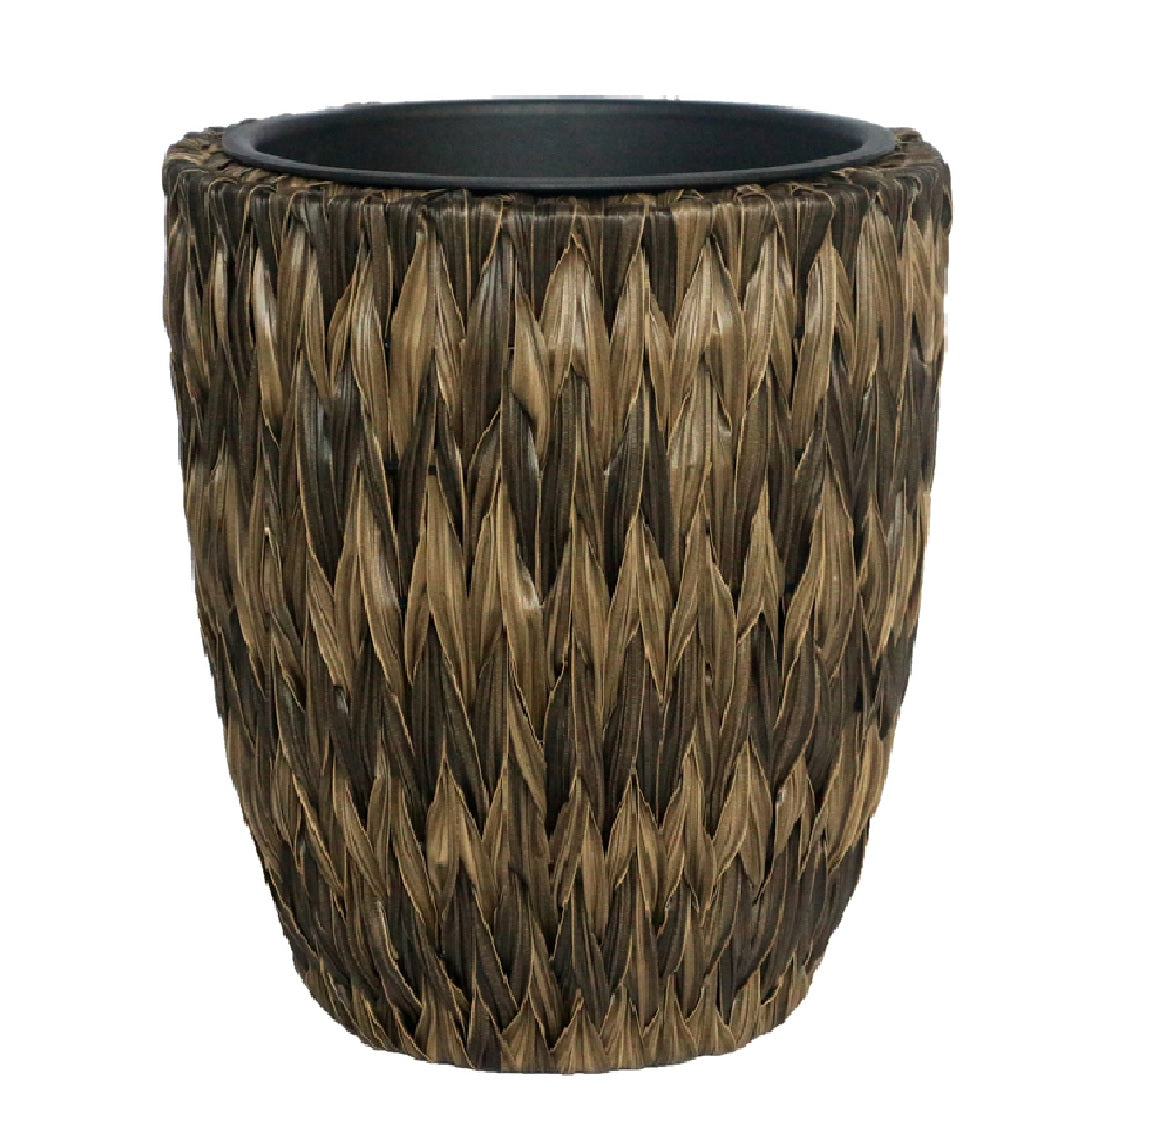 Infinity 21566A-L Twisted Banana Leaf Planter, Brown